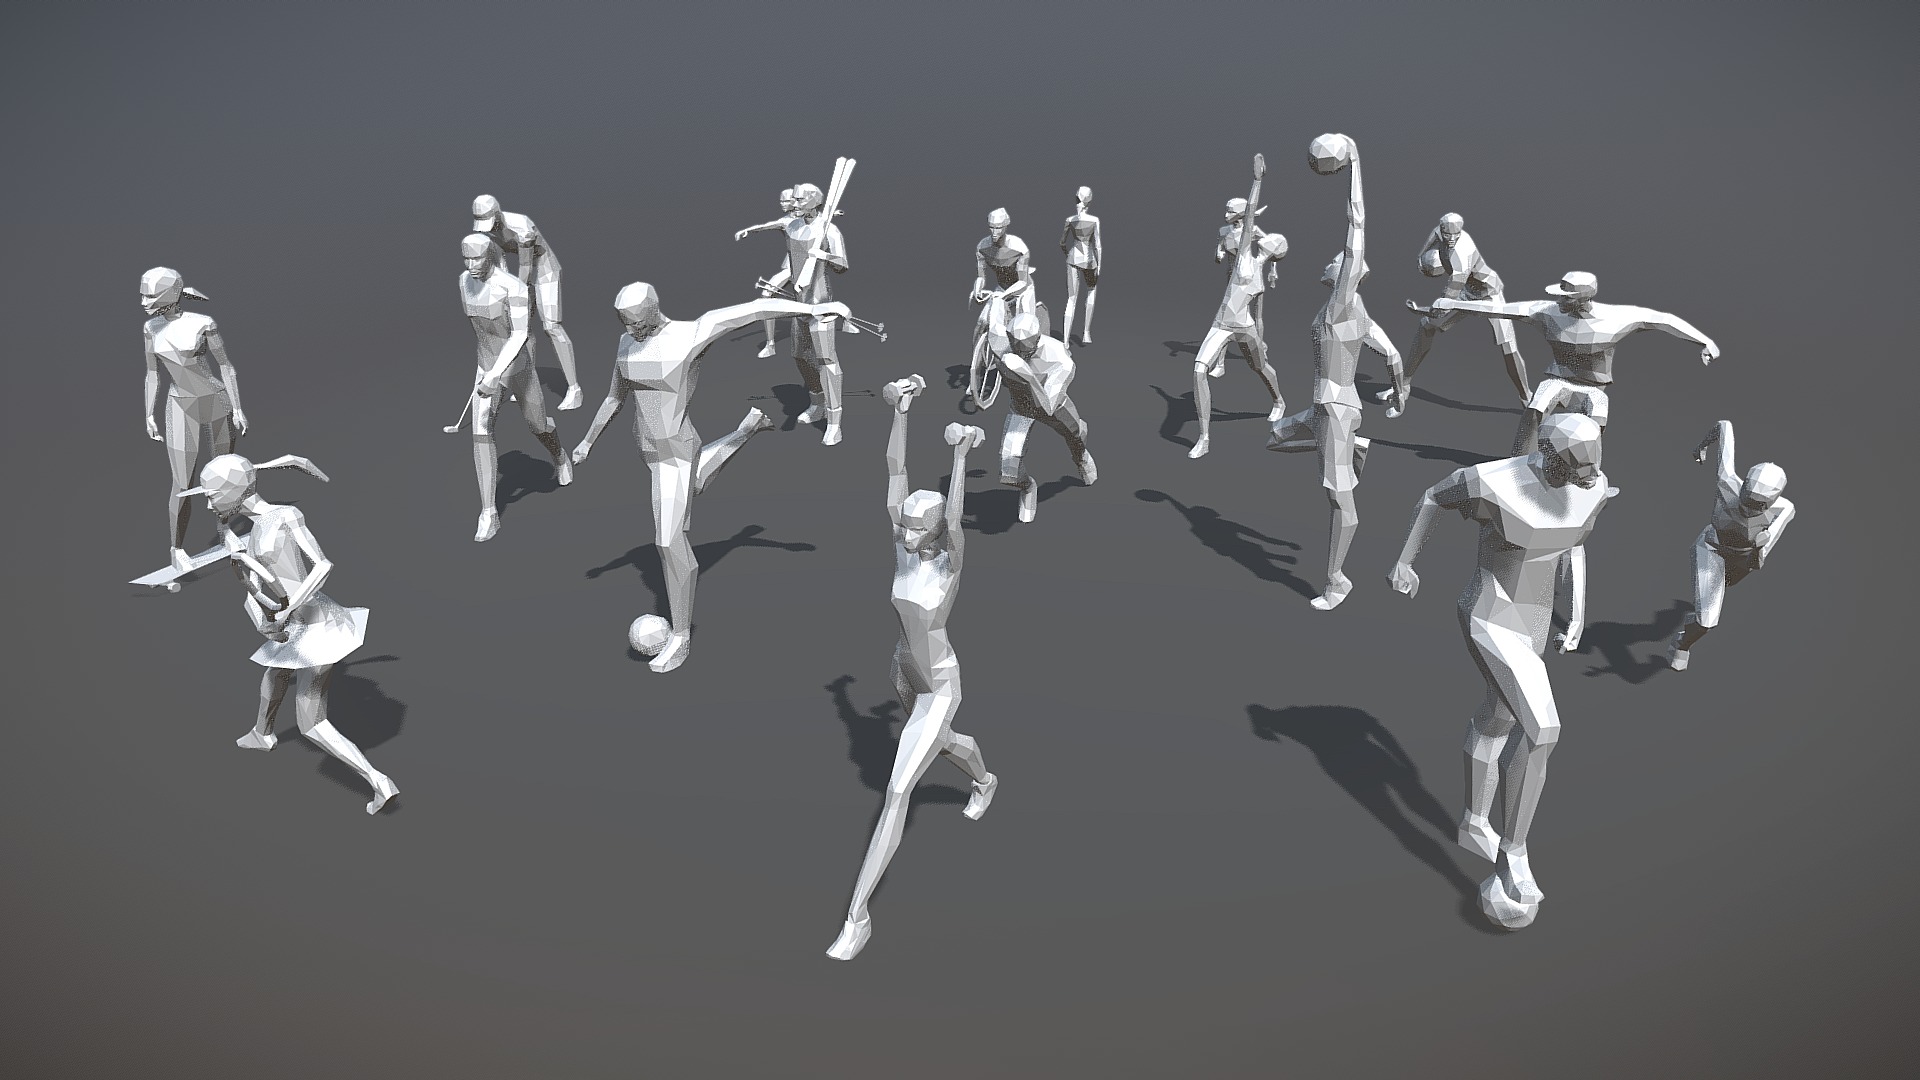 3D model Low Poly Sport Pose - This is a 3D model of the Low Poly Sport Pose. The 3D model is about a group of people in white uniforms.